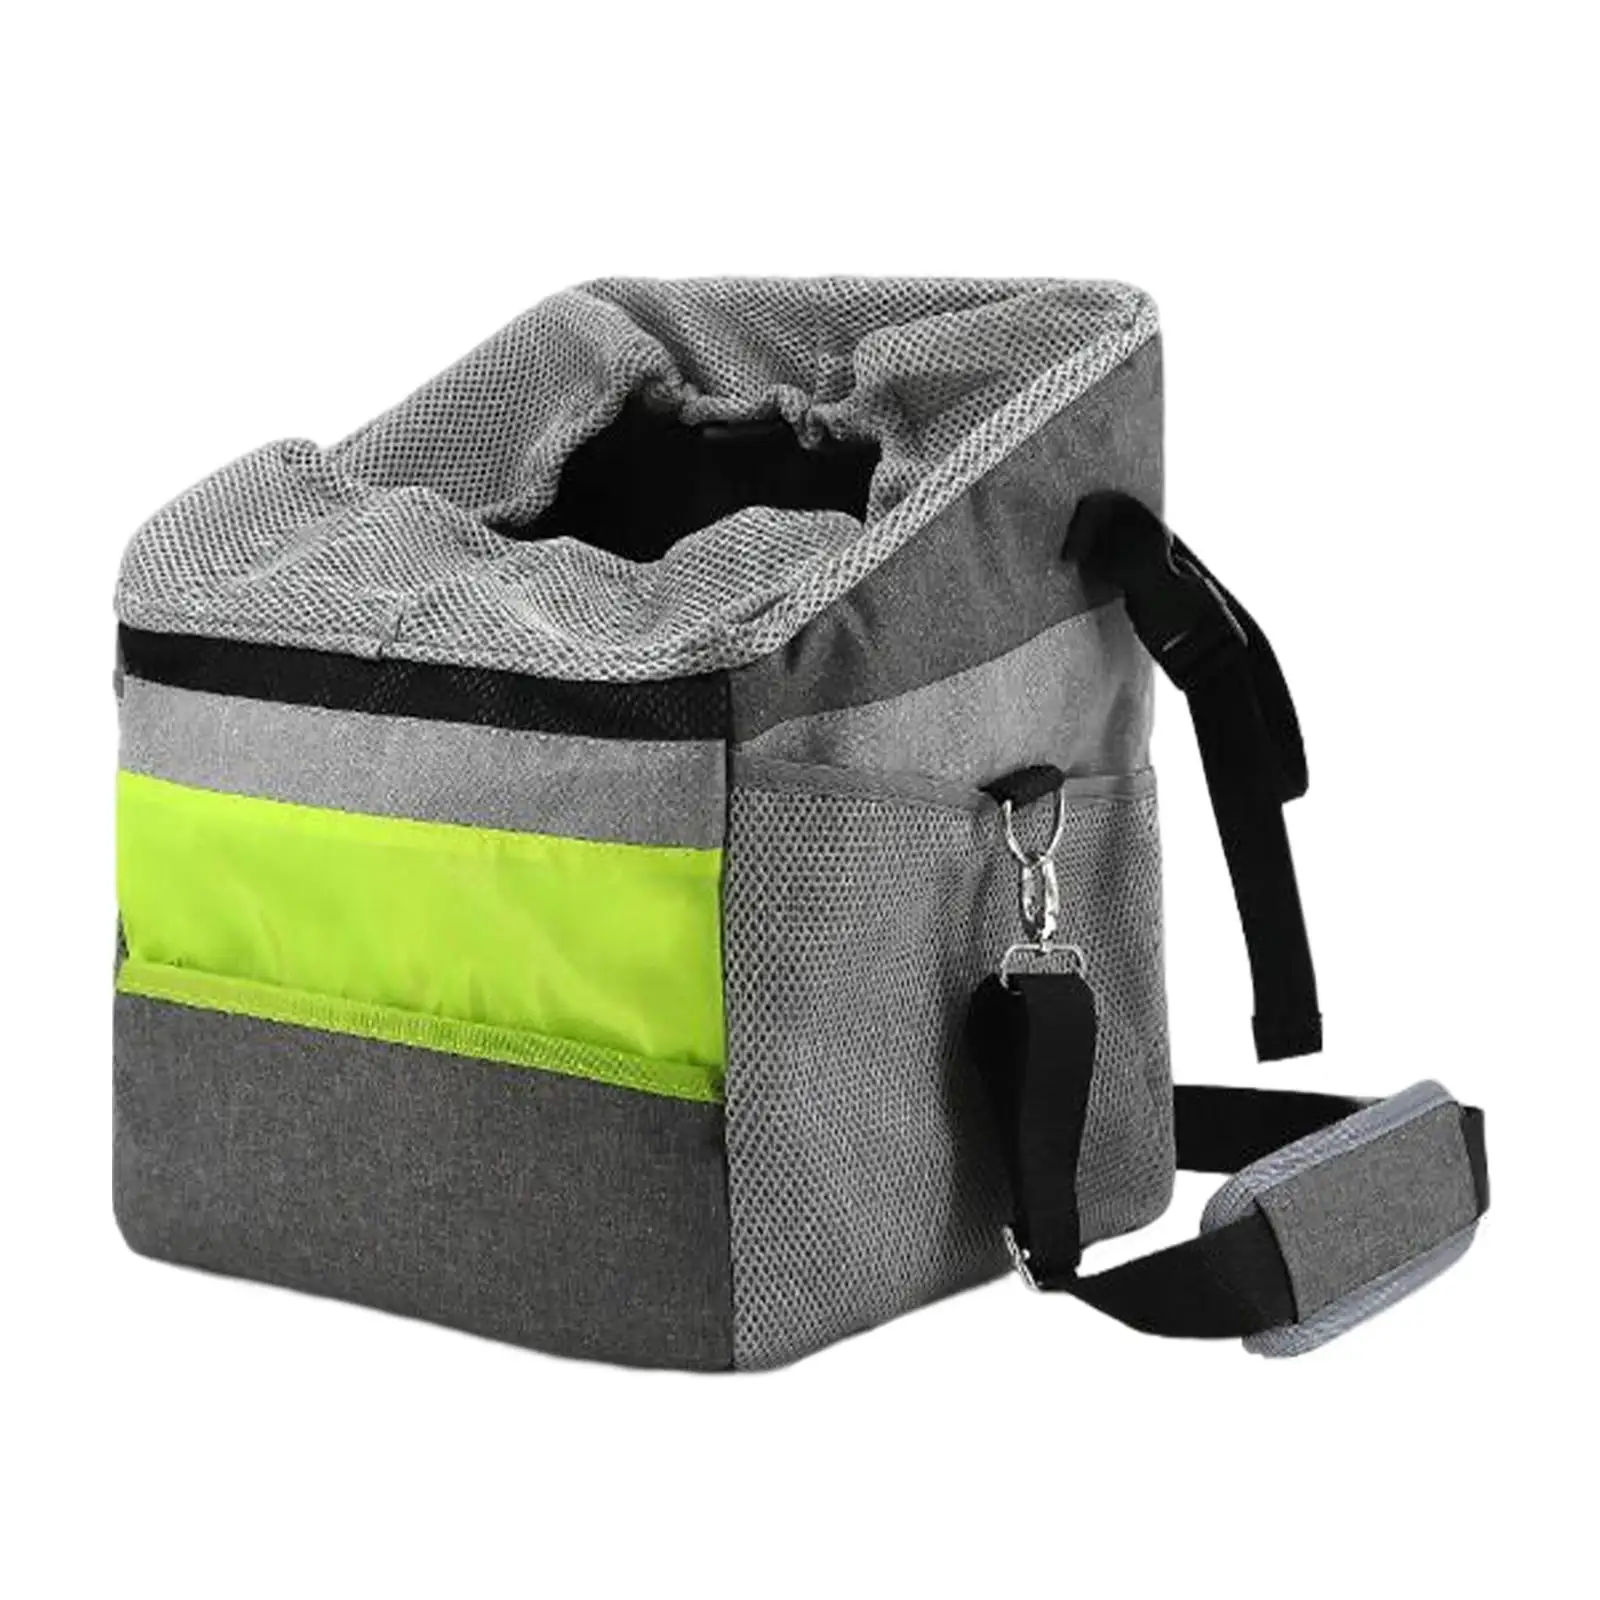 Pet Carrier for Bike Front Cycling bag Backpack Handlebar Basket Bicycle Basket for Cycling Ridding Hiking Travel Shopping